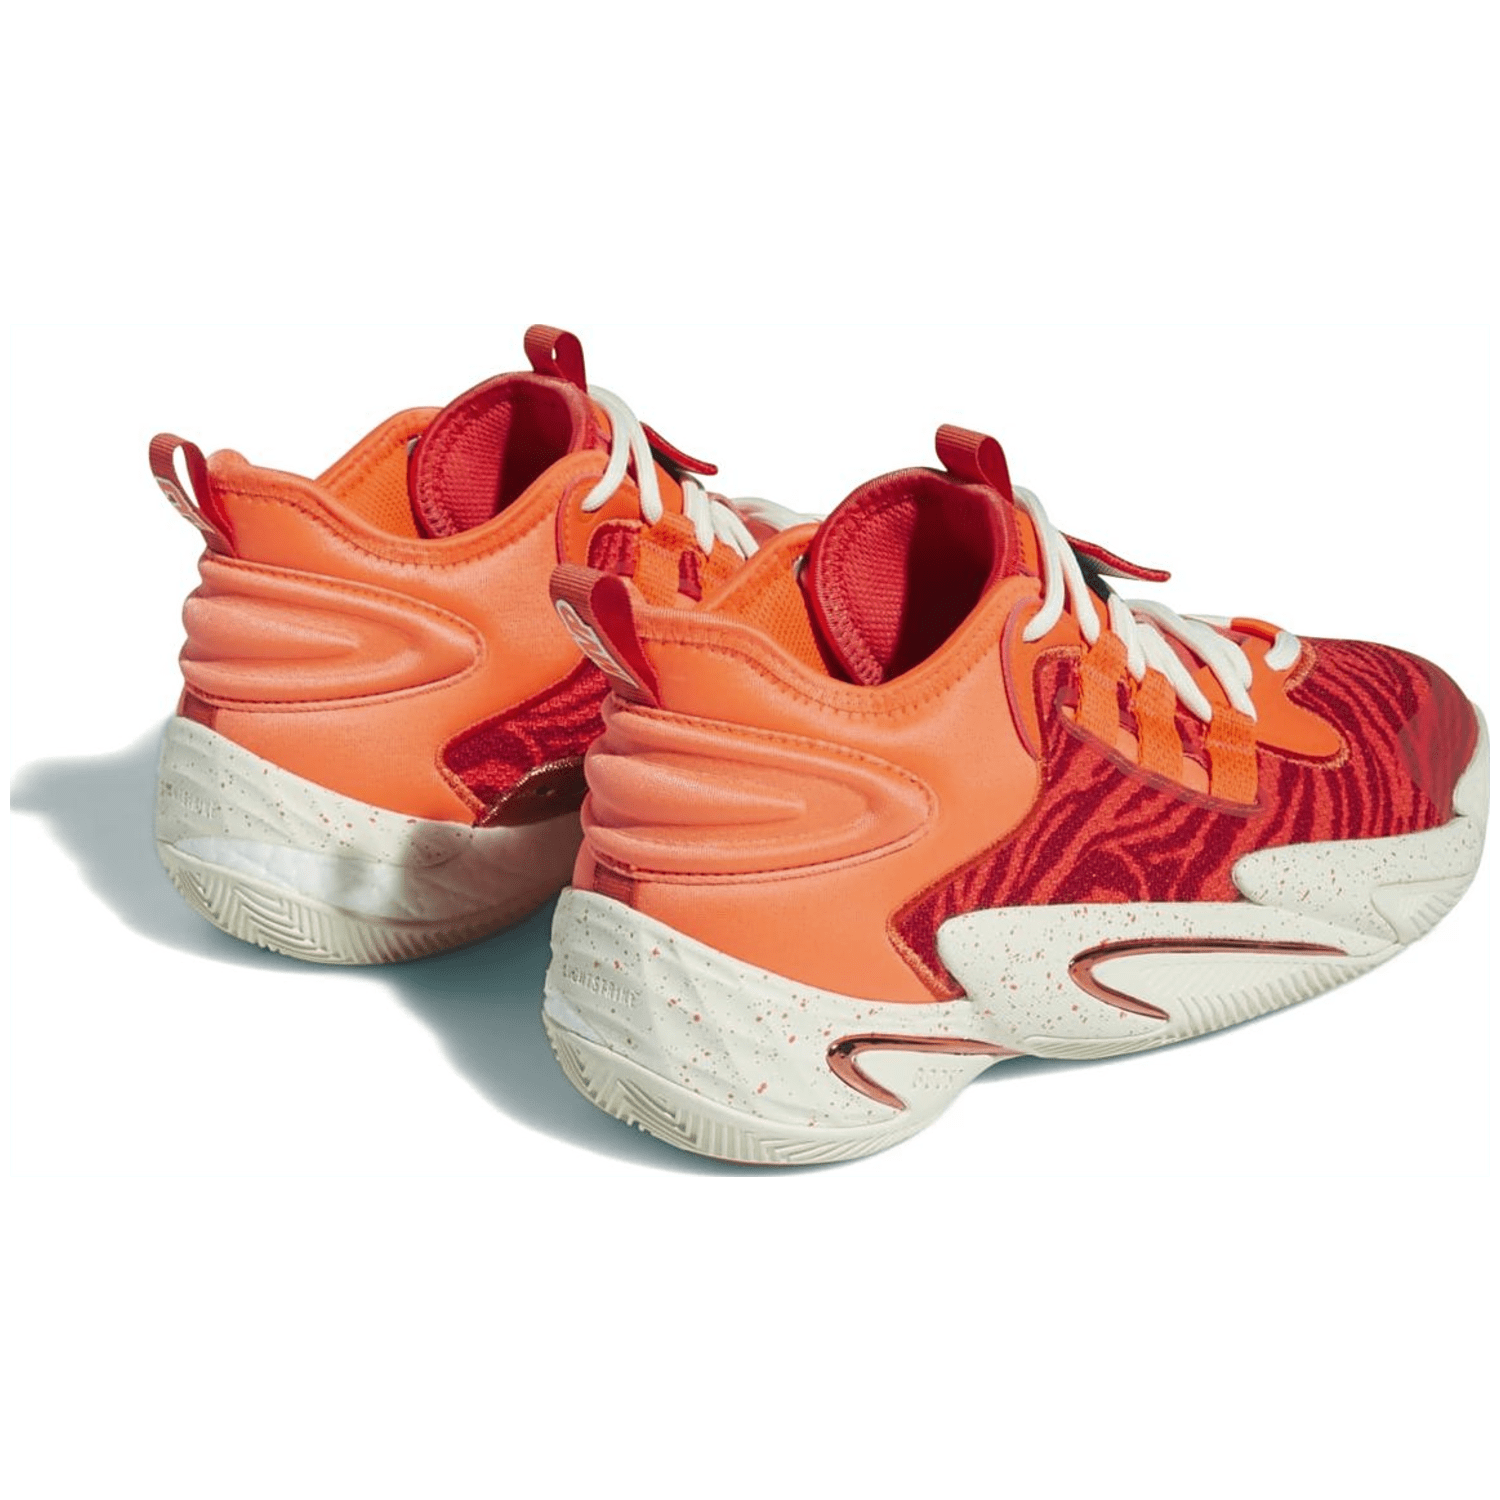 Adidas BYW Select Schuh Unisex